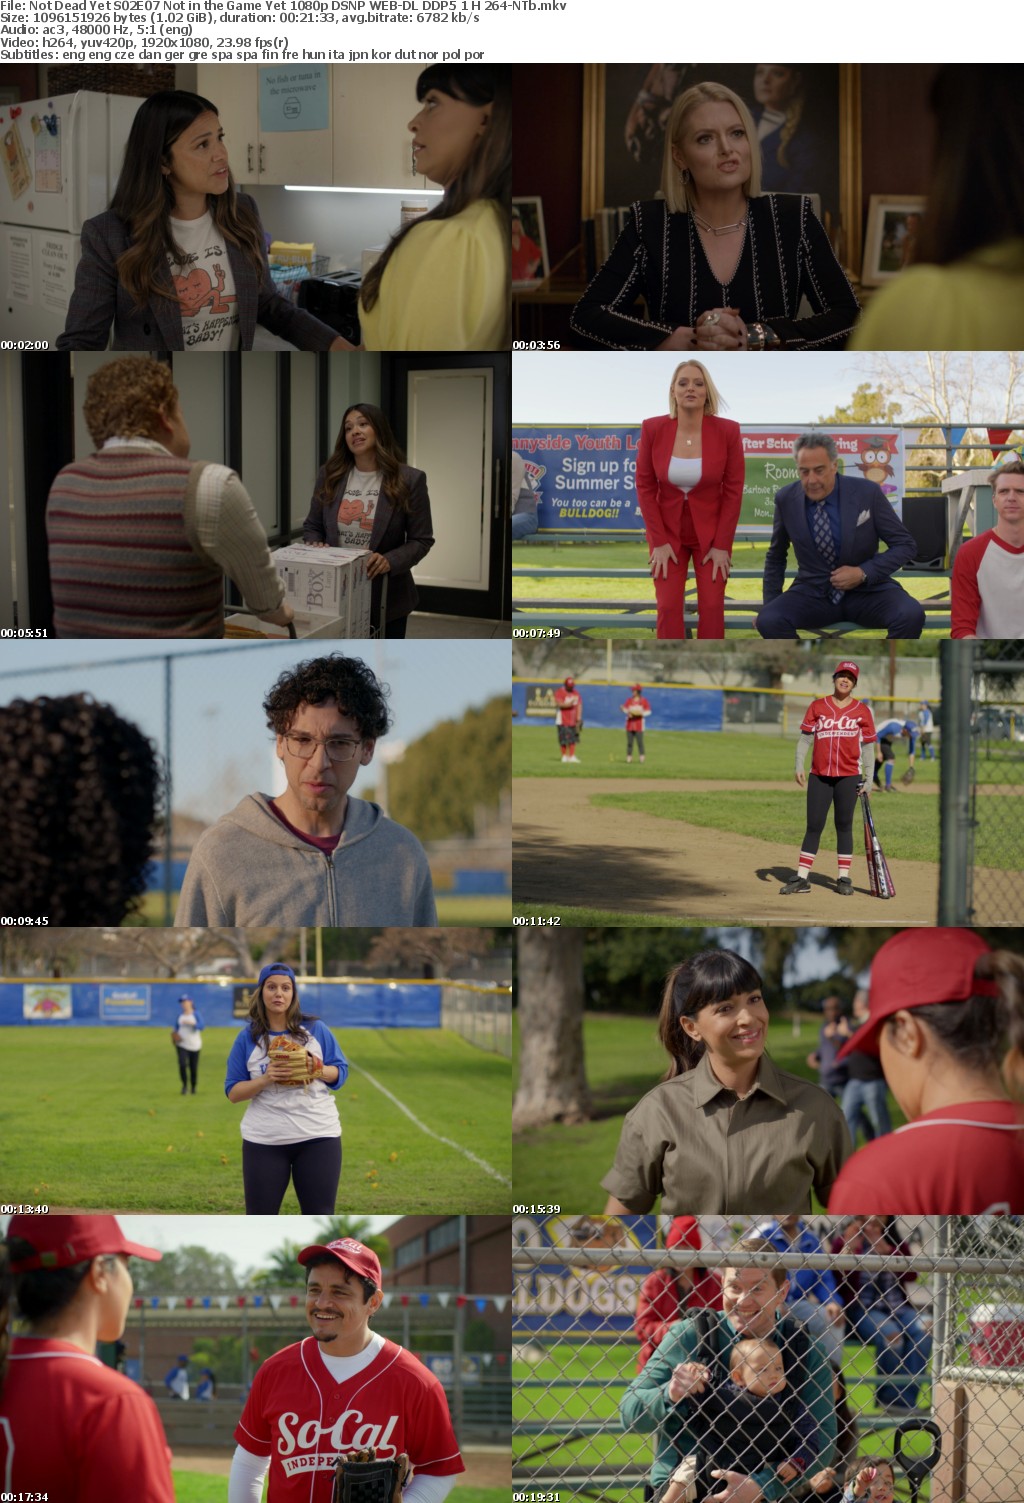 Not Dead Yet S02E07 Not in the Game Yet 1080p DSNP WEB-DL DDP5 1 H 264-NTb